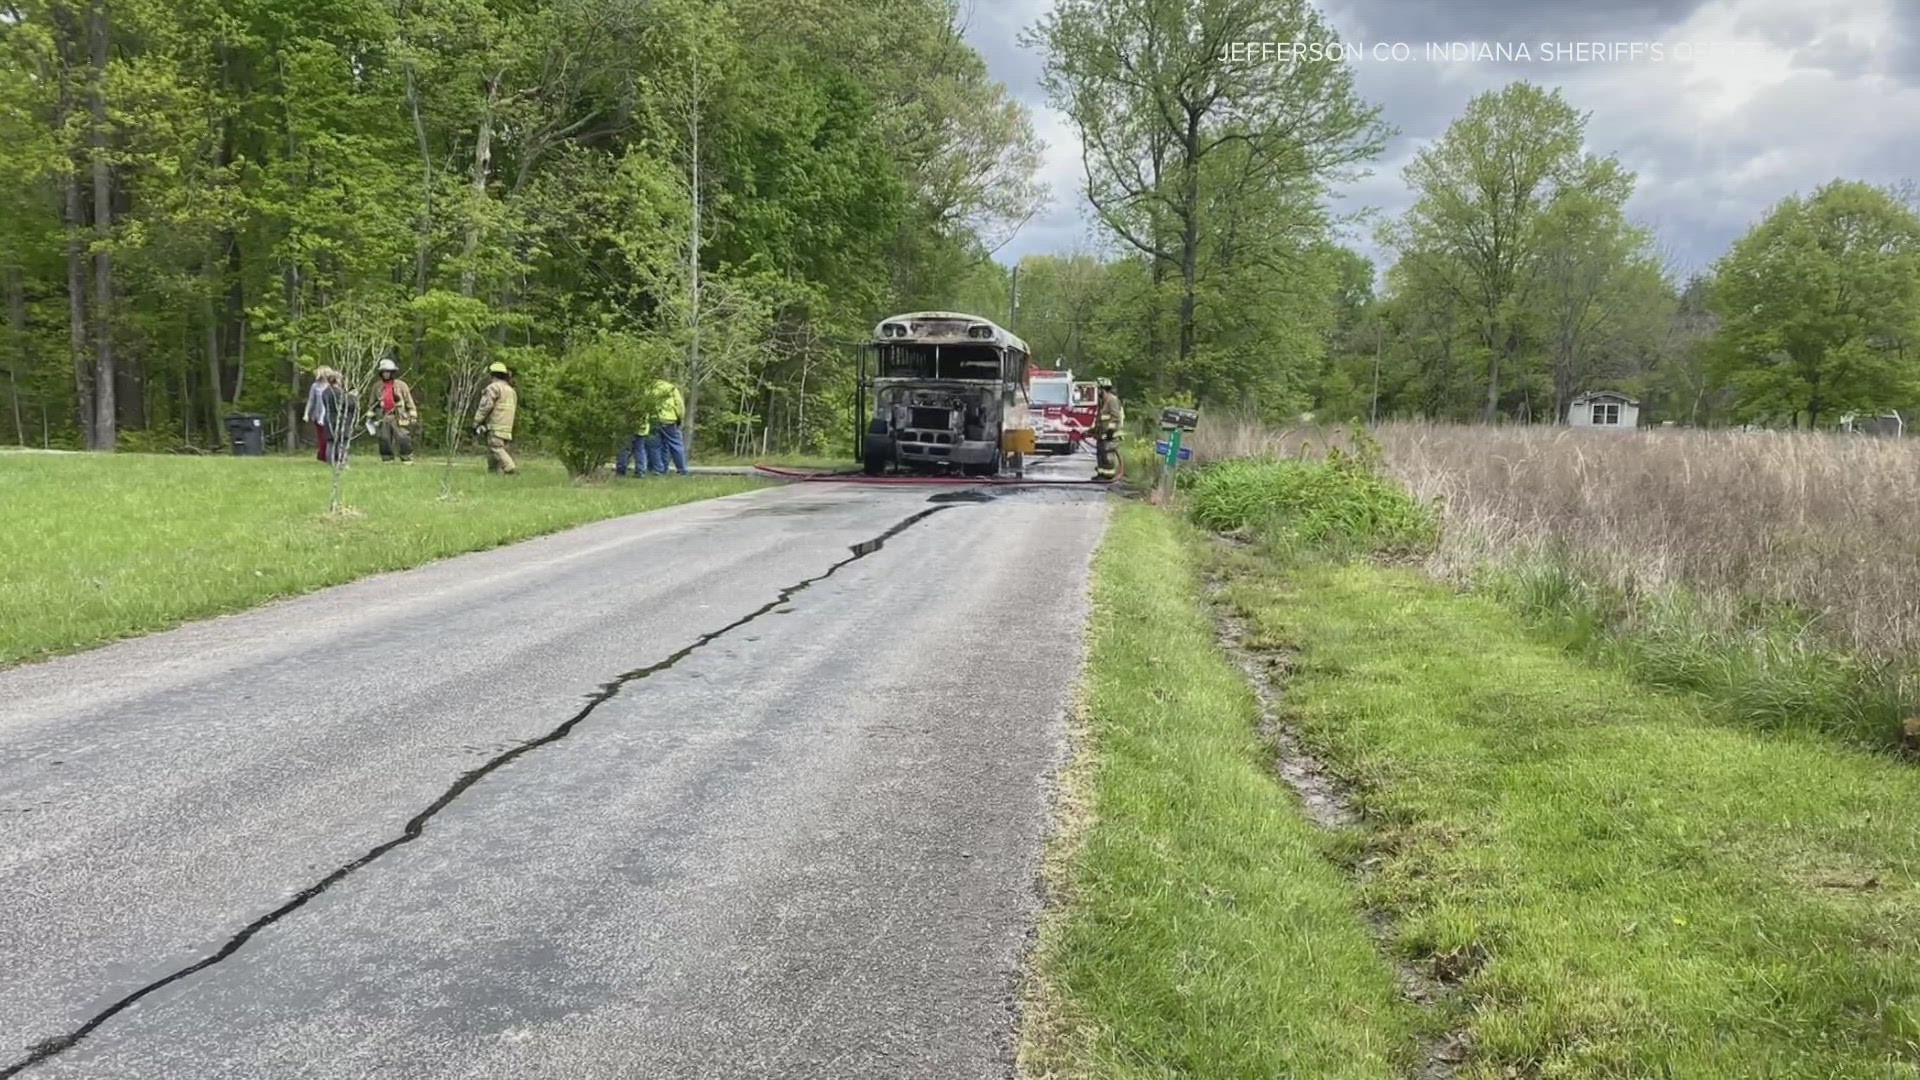 Authorities are investigating the incident that happened Tuesday near Madison, Indiana. All of the children and the driver made it off the bus safely.